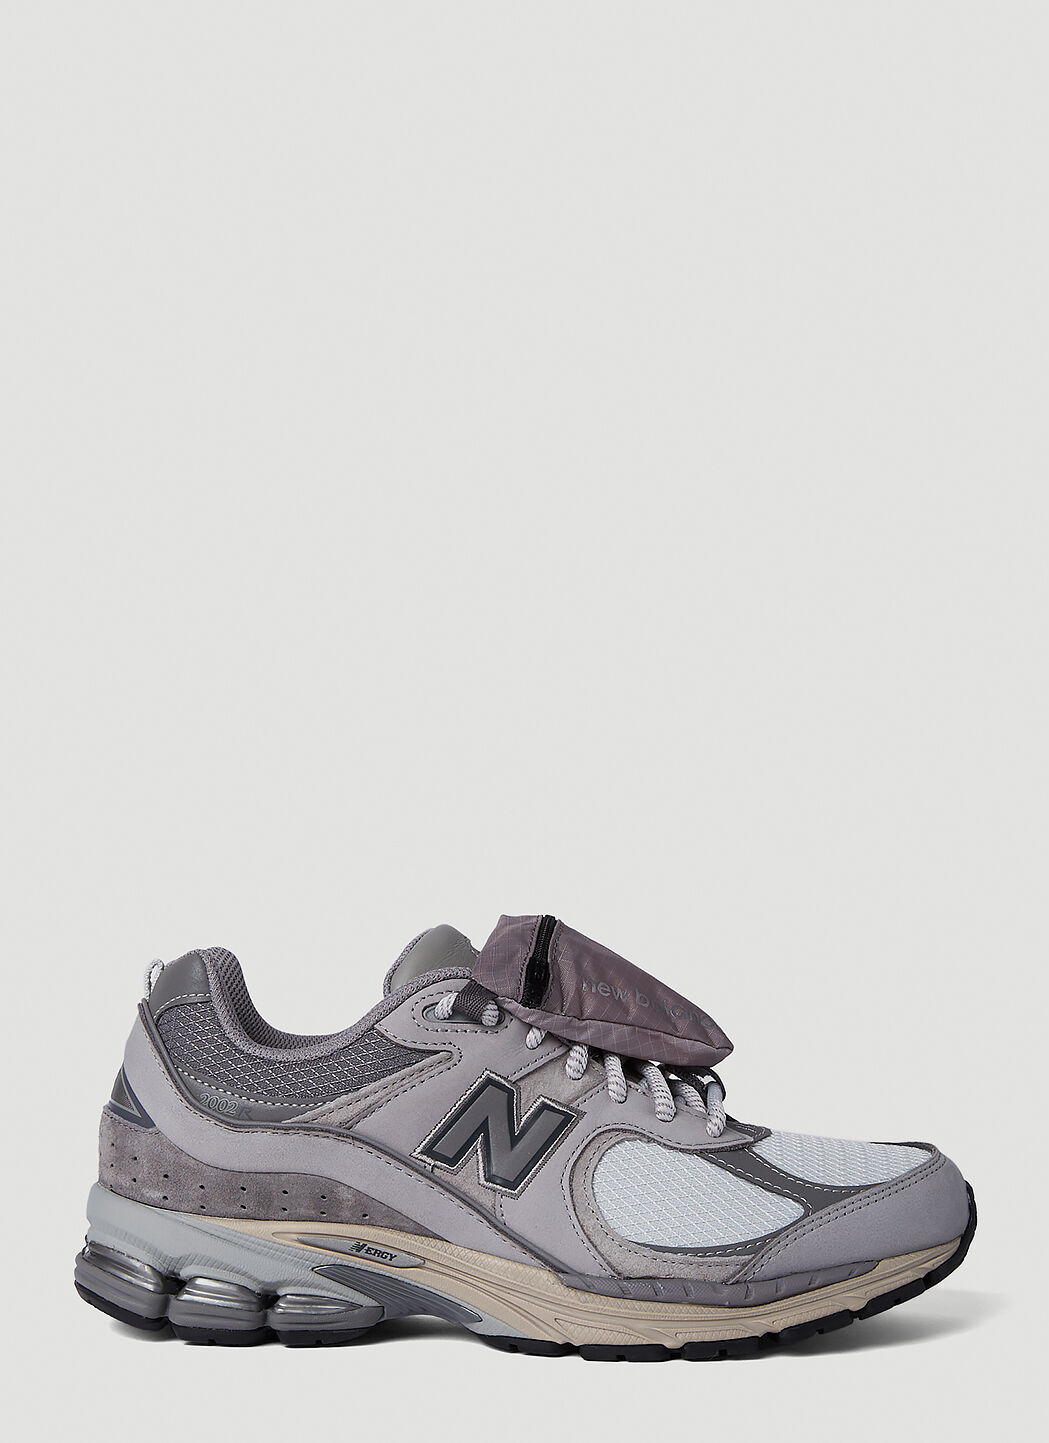 New Balance 2002 Stealth Pack Sneakers Grey new0254004